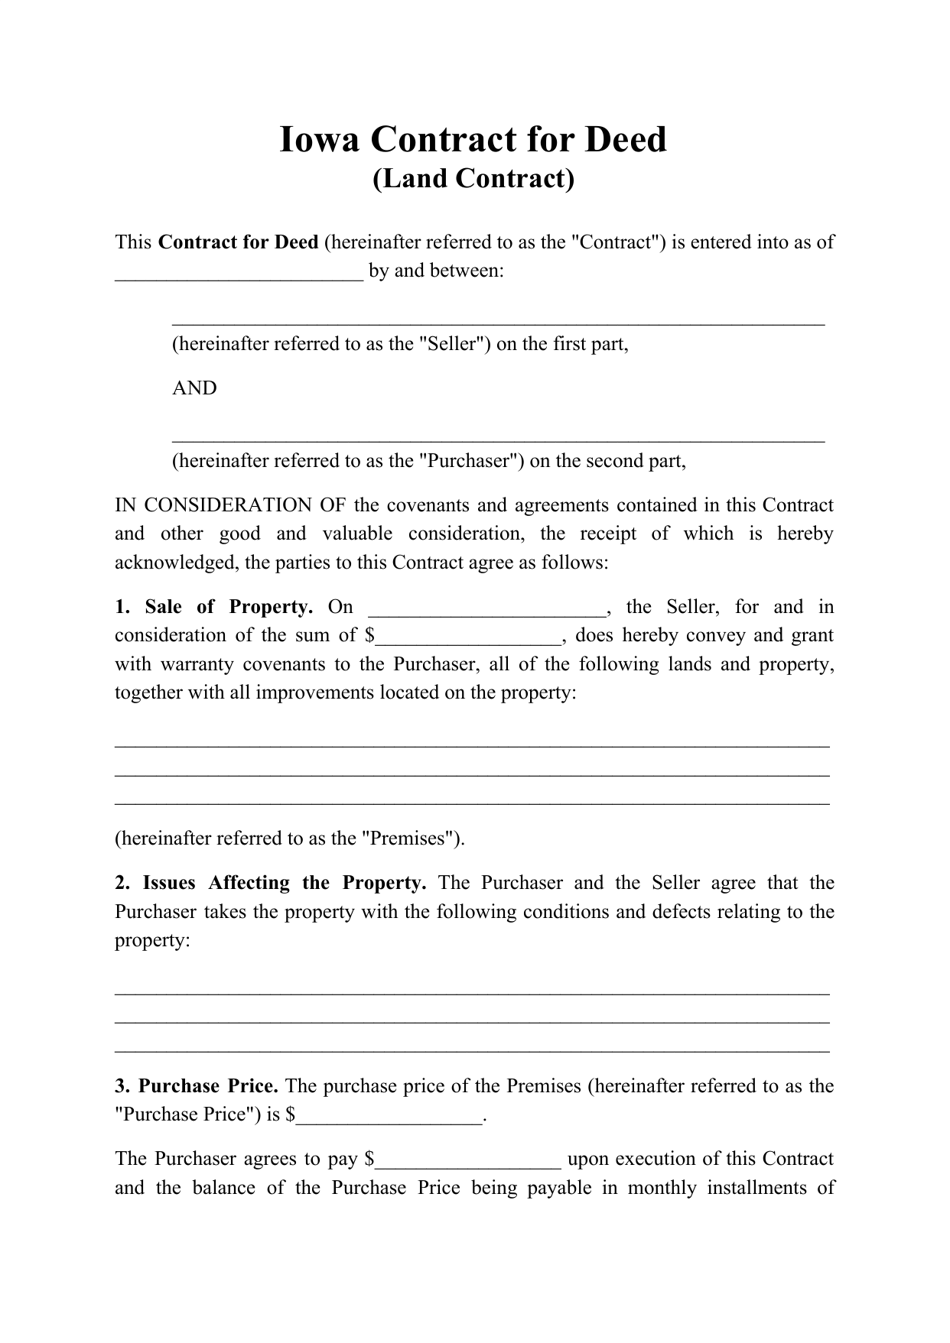 Contract for Deed (Land Contract) - Iowa, Page 1